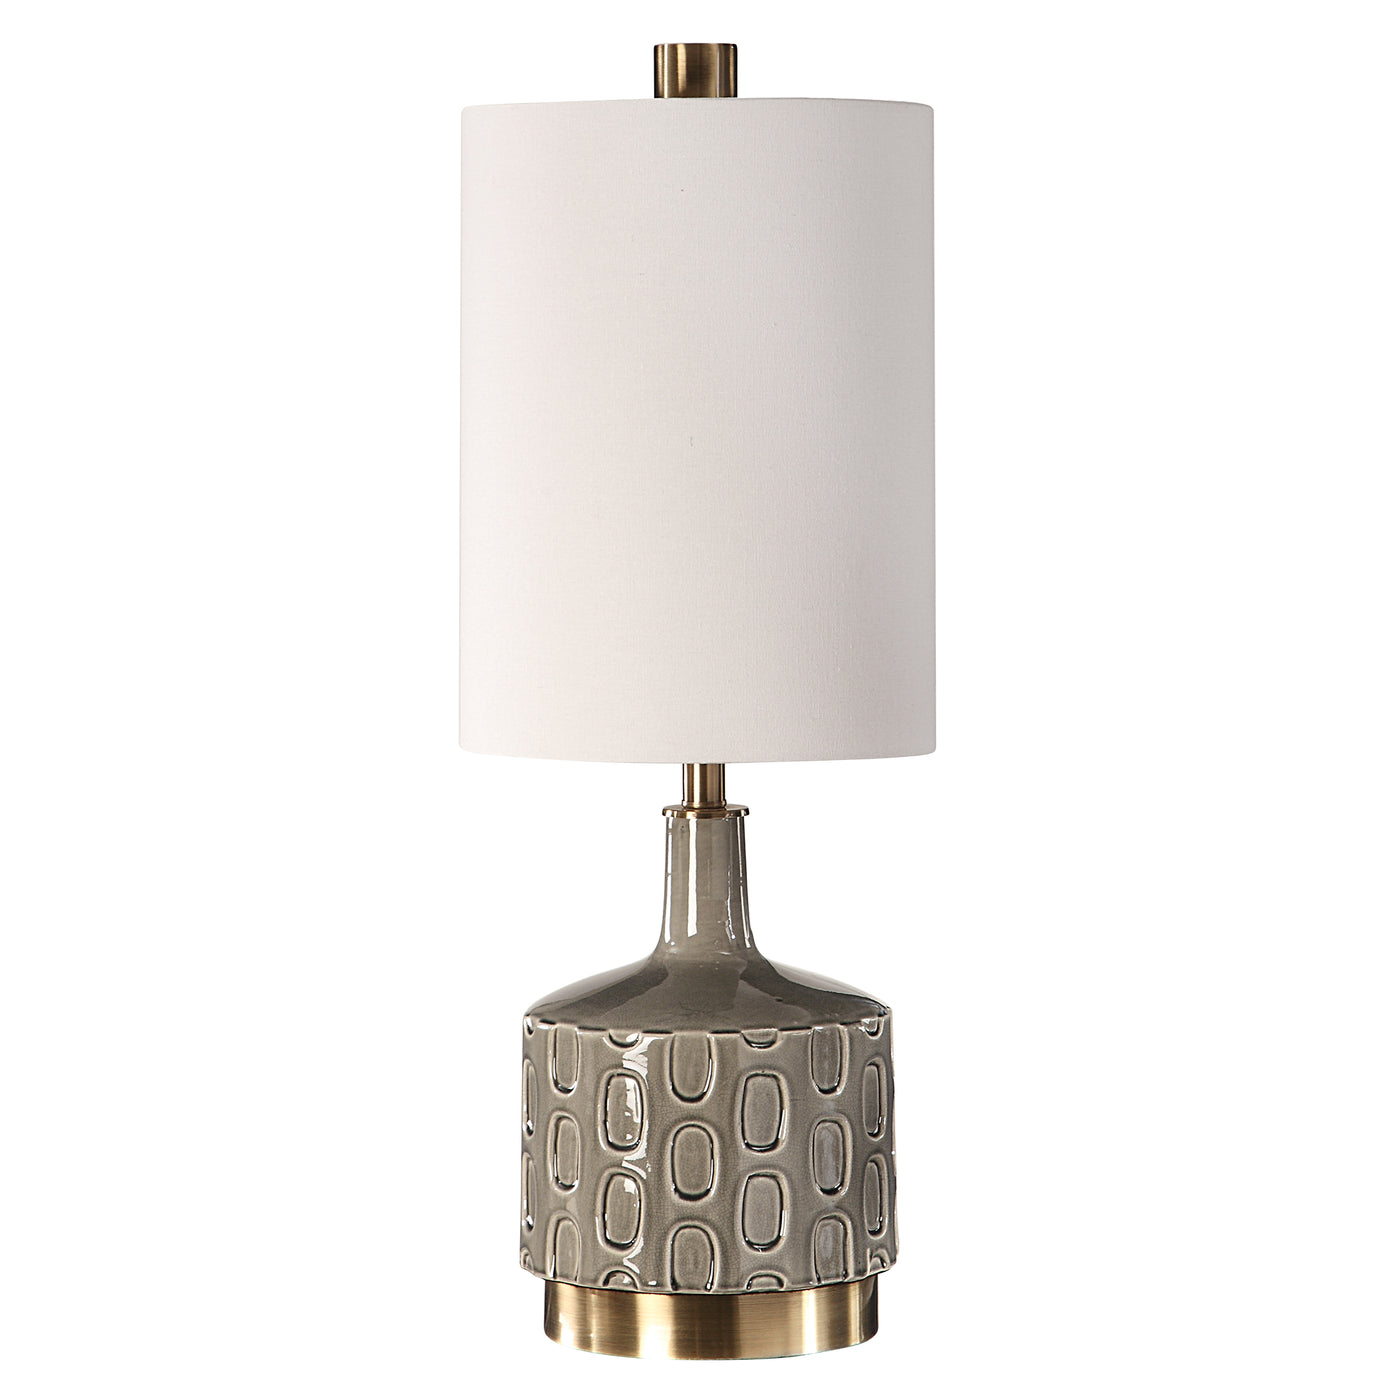 Finished In A Crackled Gray Glaze, This Ceramic Table Lamp Echoes Mid-century And Contemporary Styles. The Base Of This Pi...